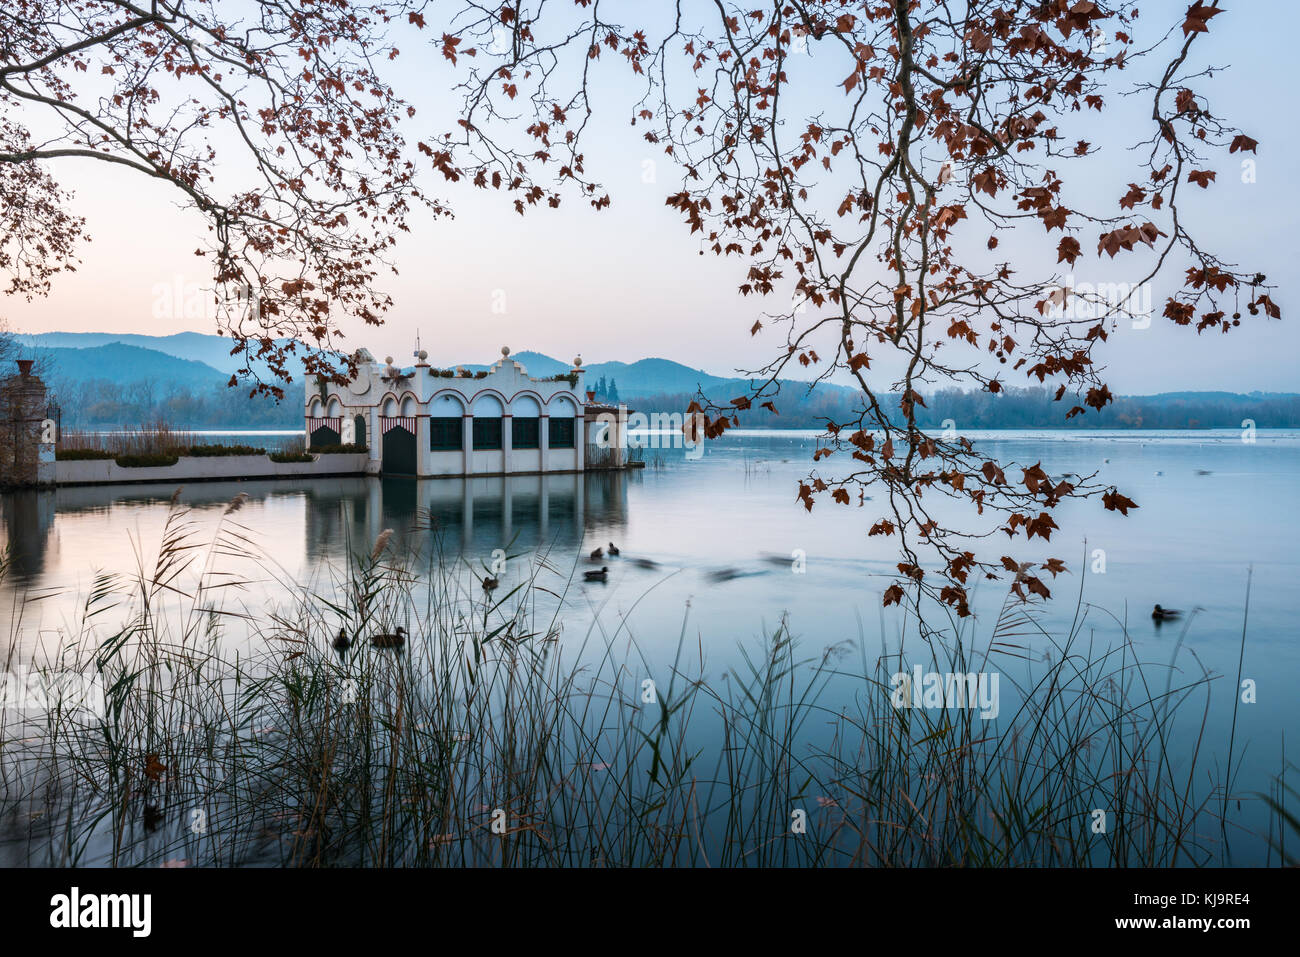 Typical building in the lake of Banyoles during a sunset Stock Photo